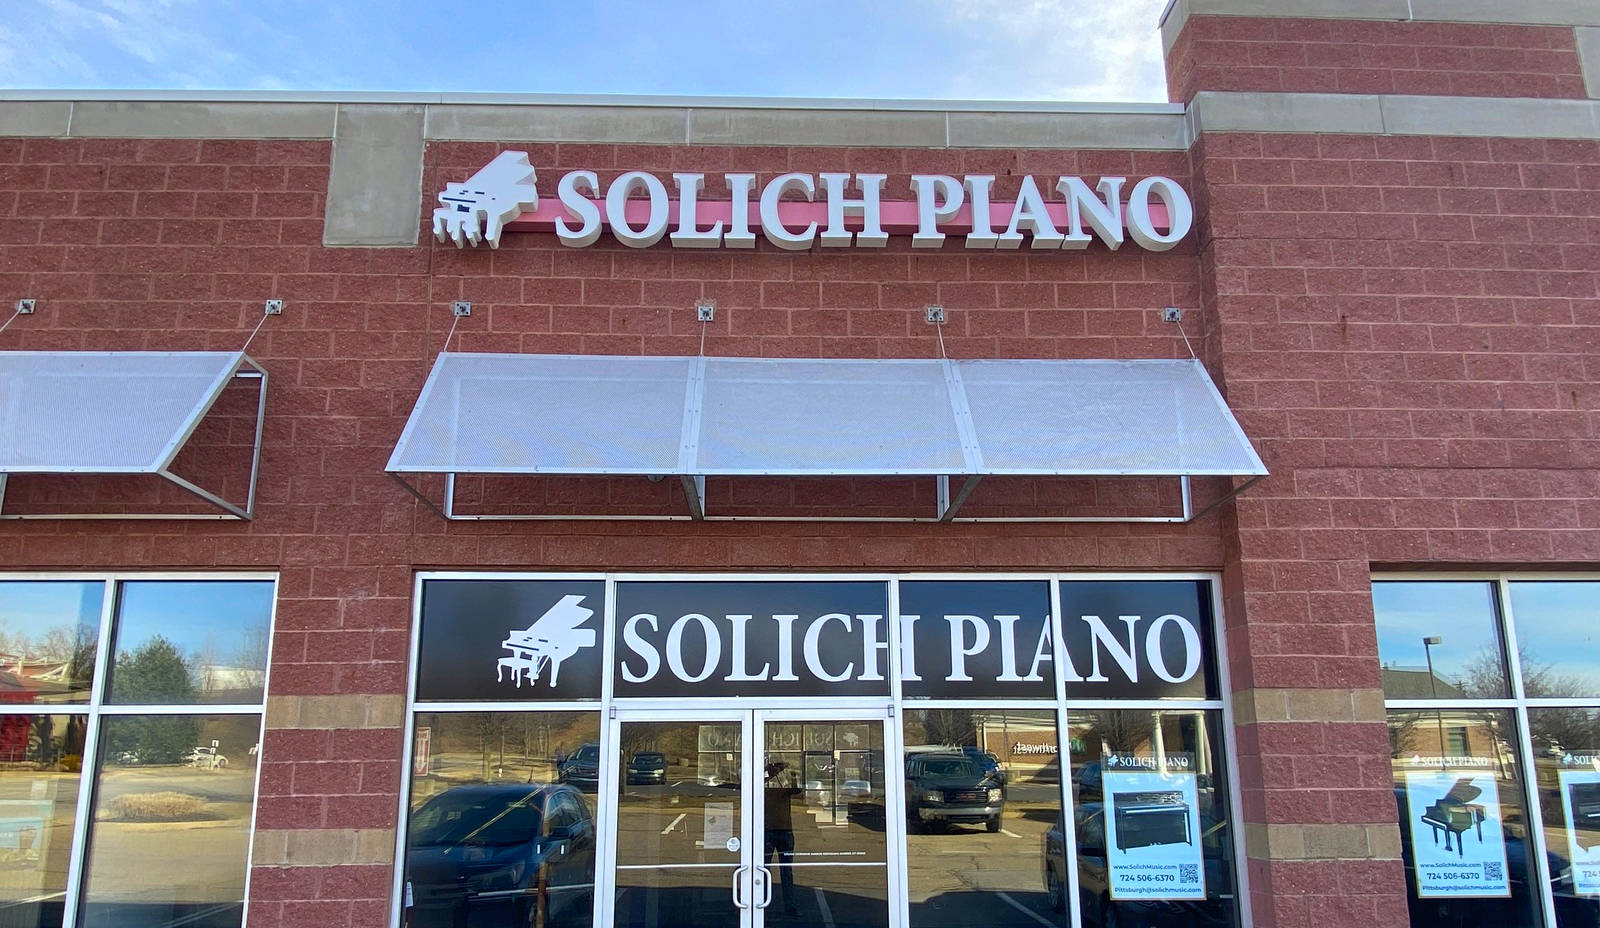 OMEA Conference - Visit Solich Piano at Booth #143